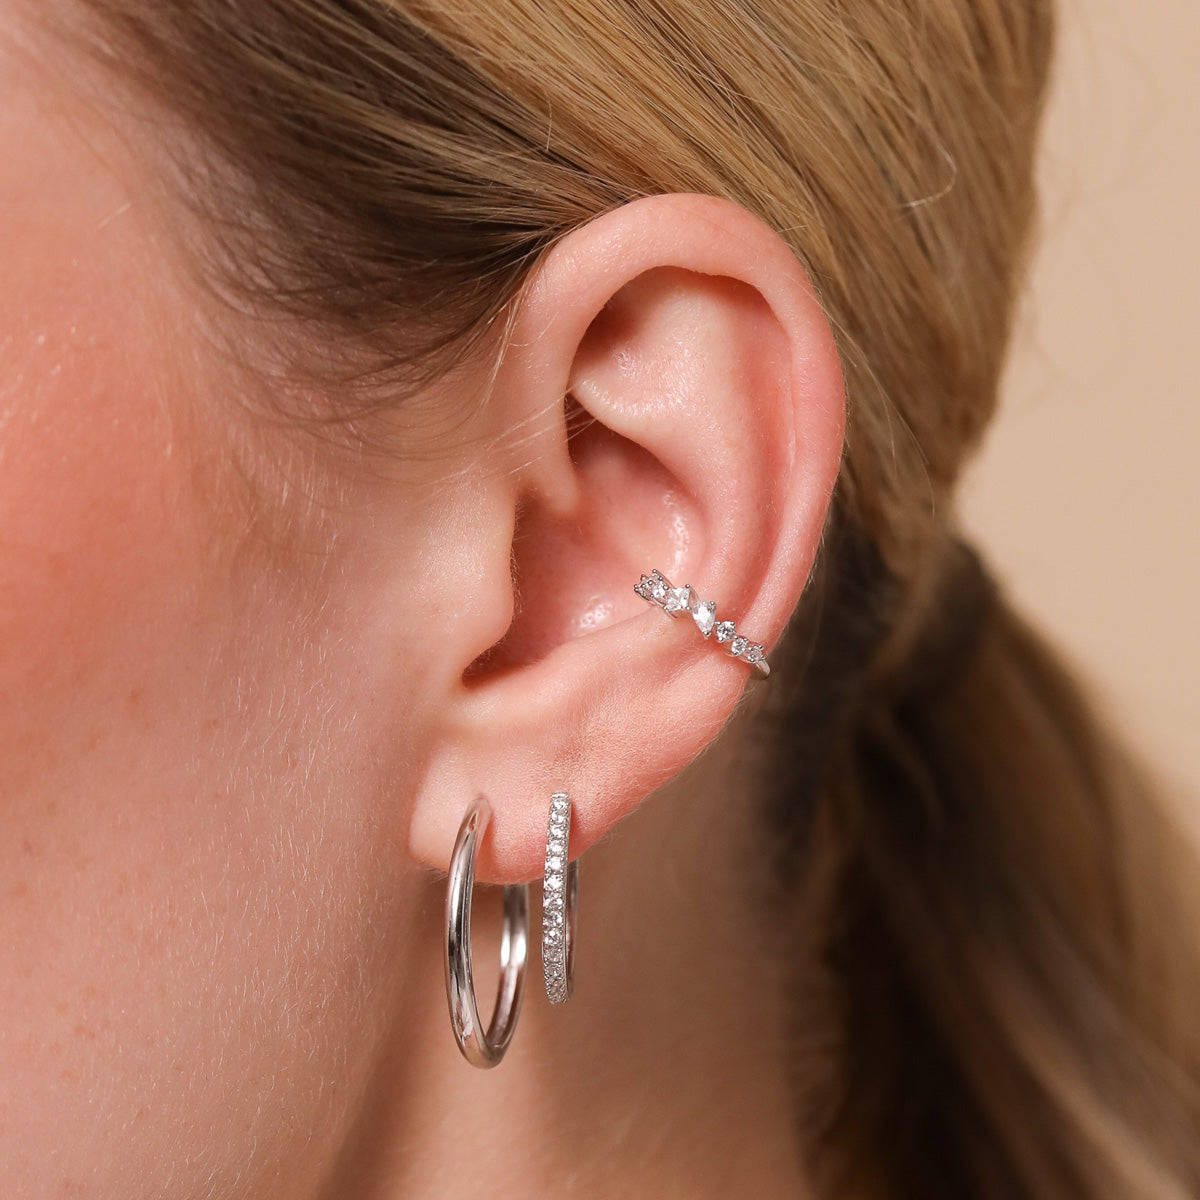 The best ear cuffs to buy now